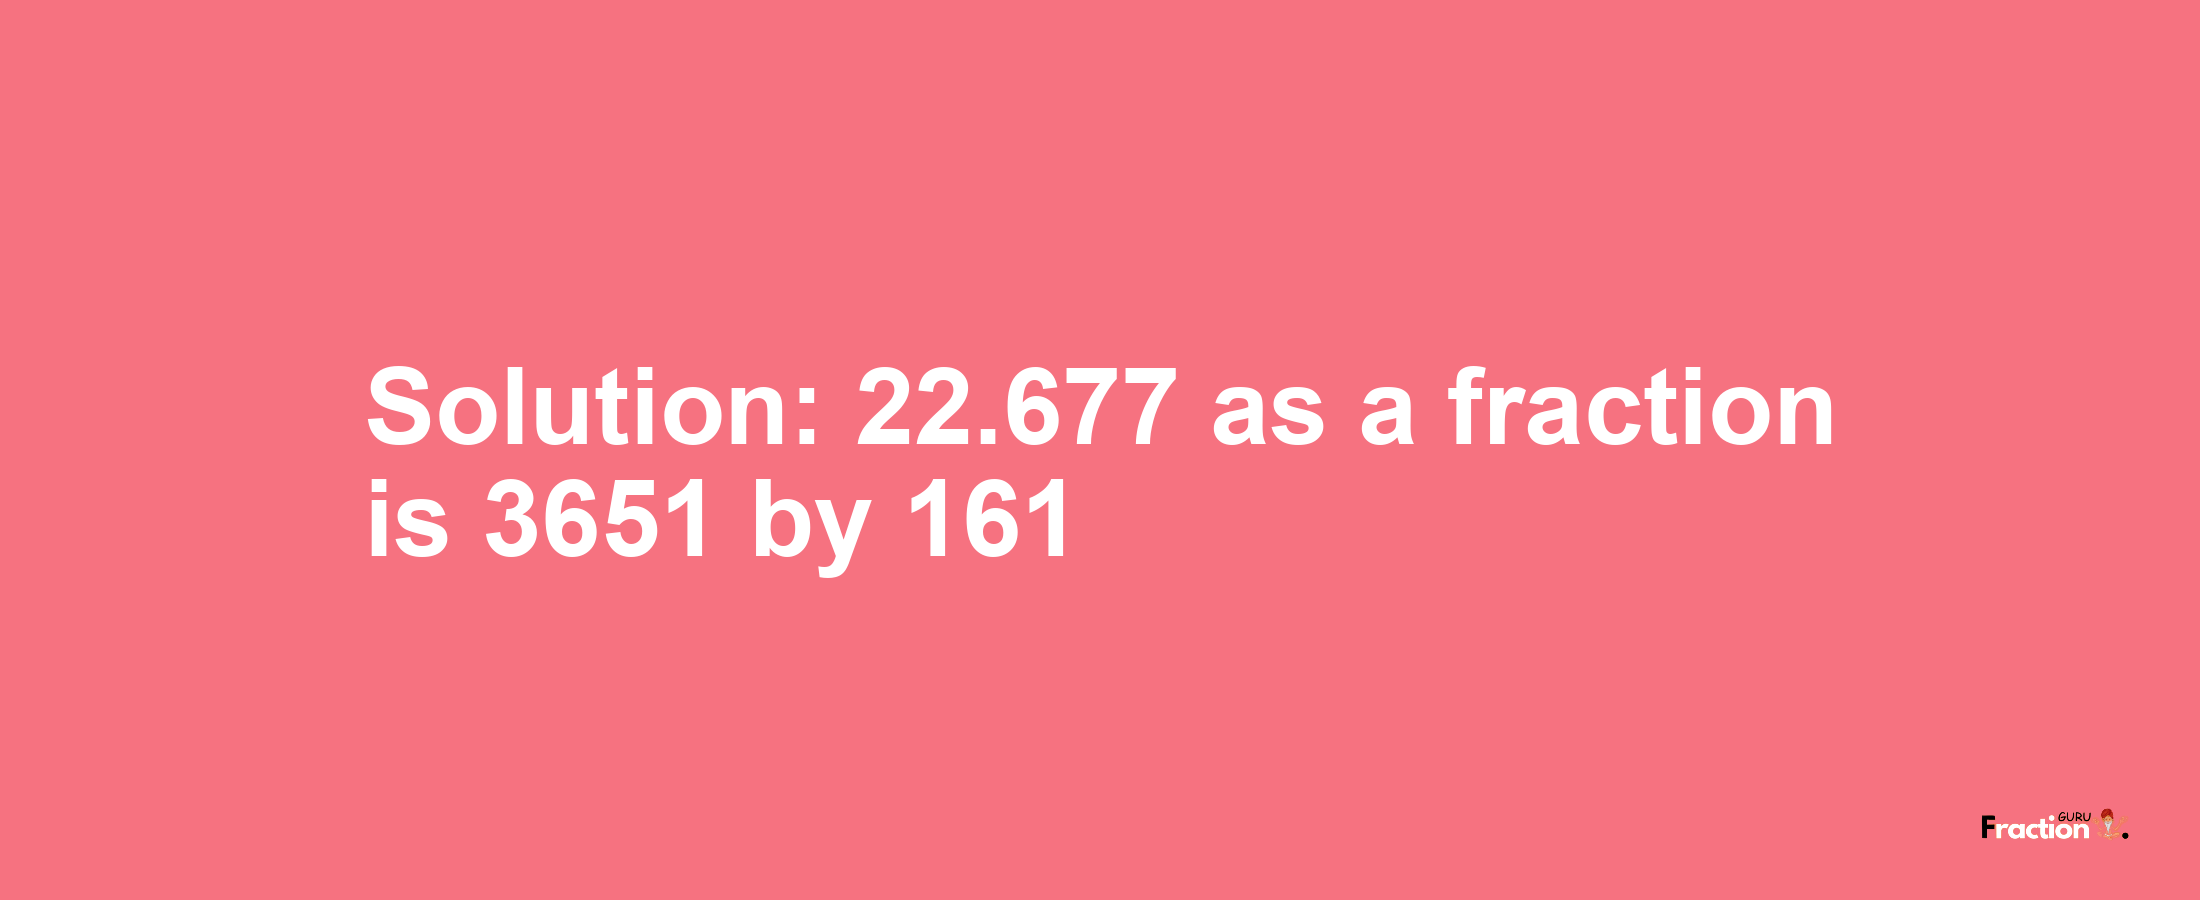 Solution:22.677 as a fraction is 3651/161